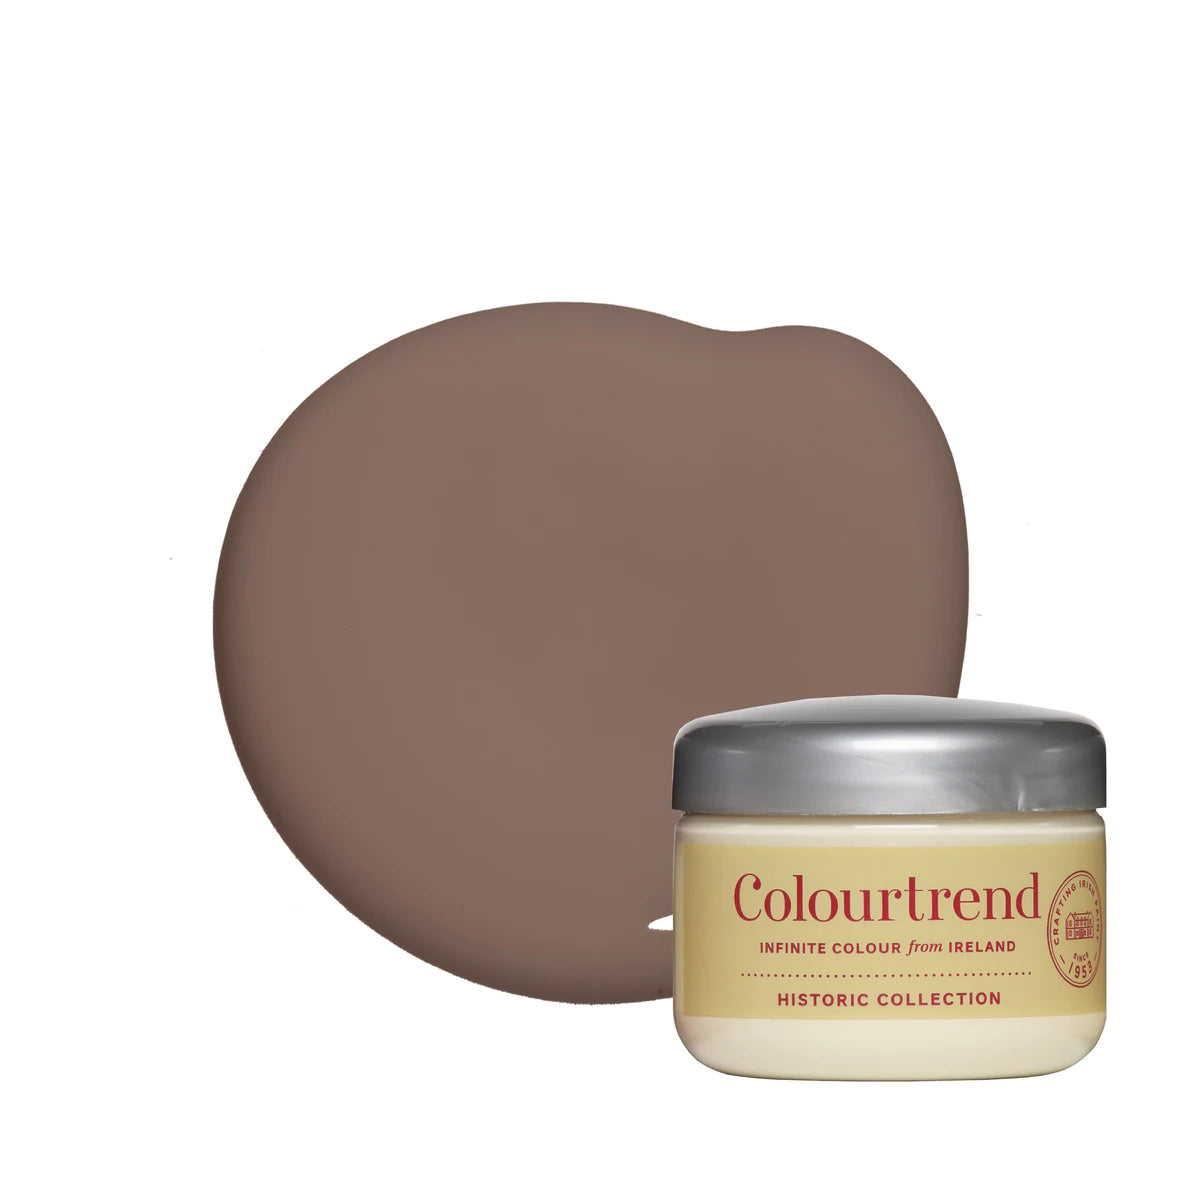 Colourtrend Porcino - Sample Pot | Weirs of Baggot St